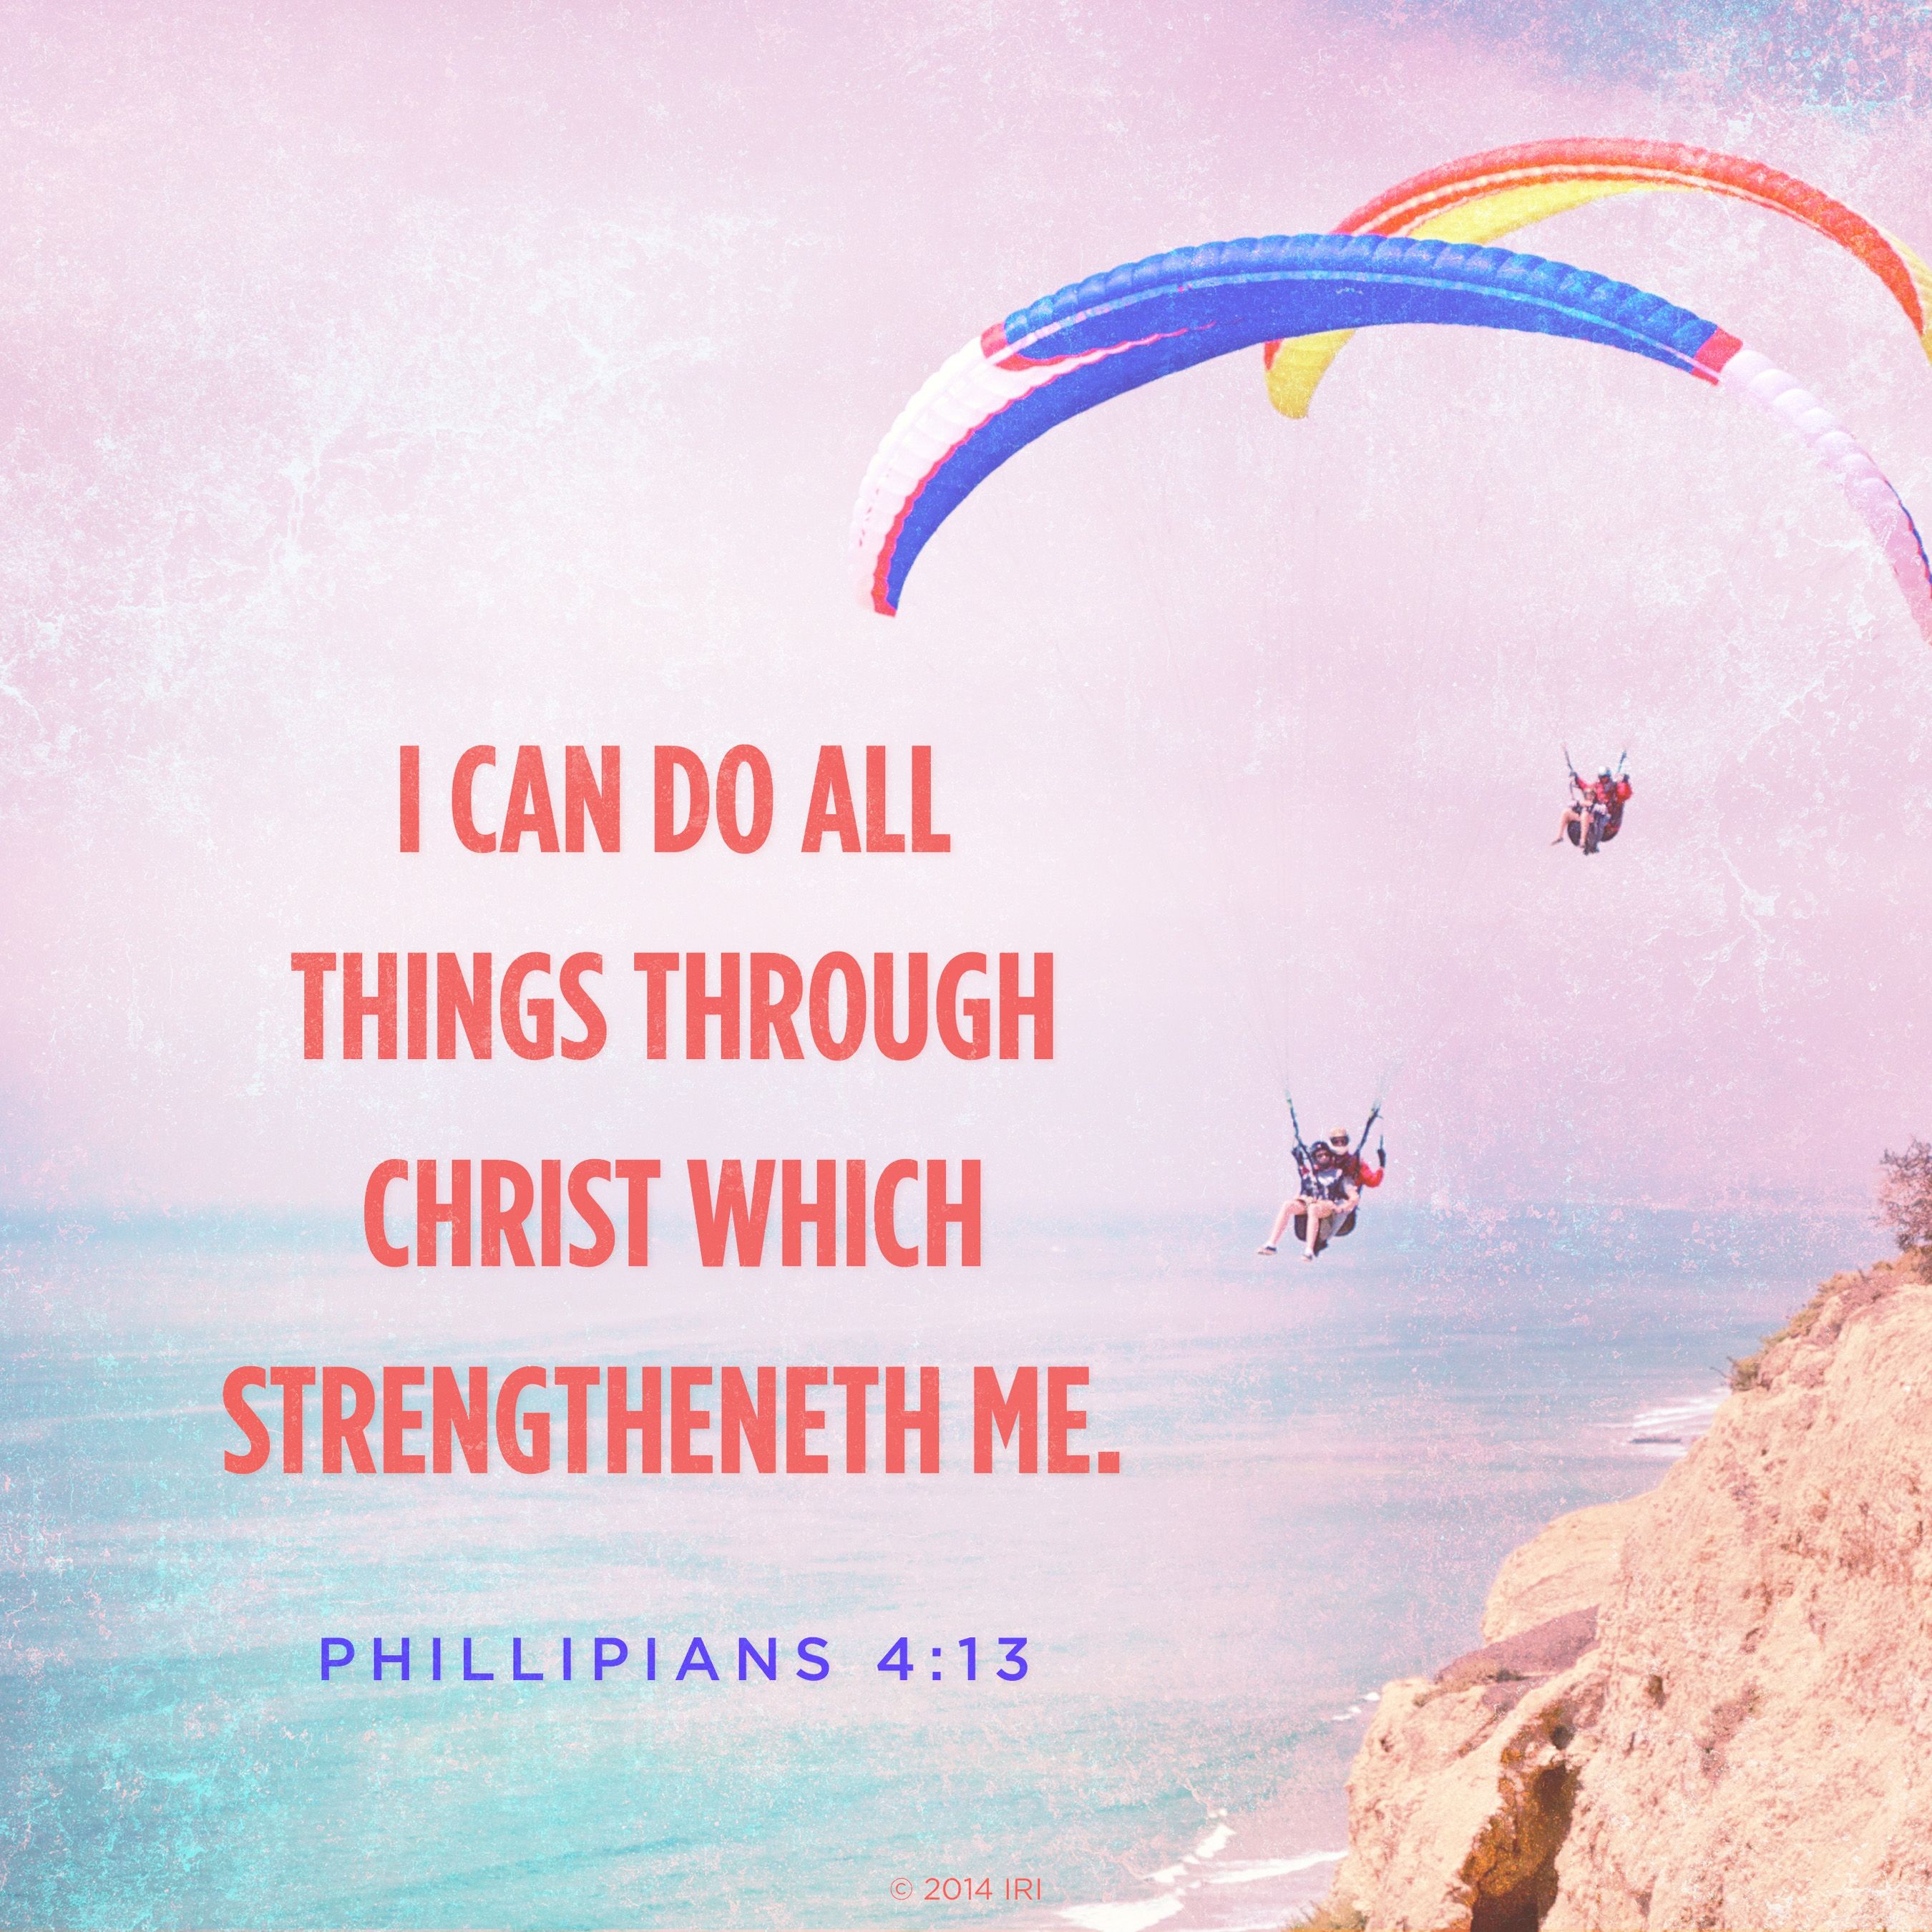 I Can Do All Things Through Christ Wallpapers